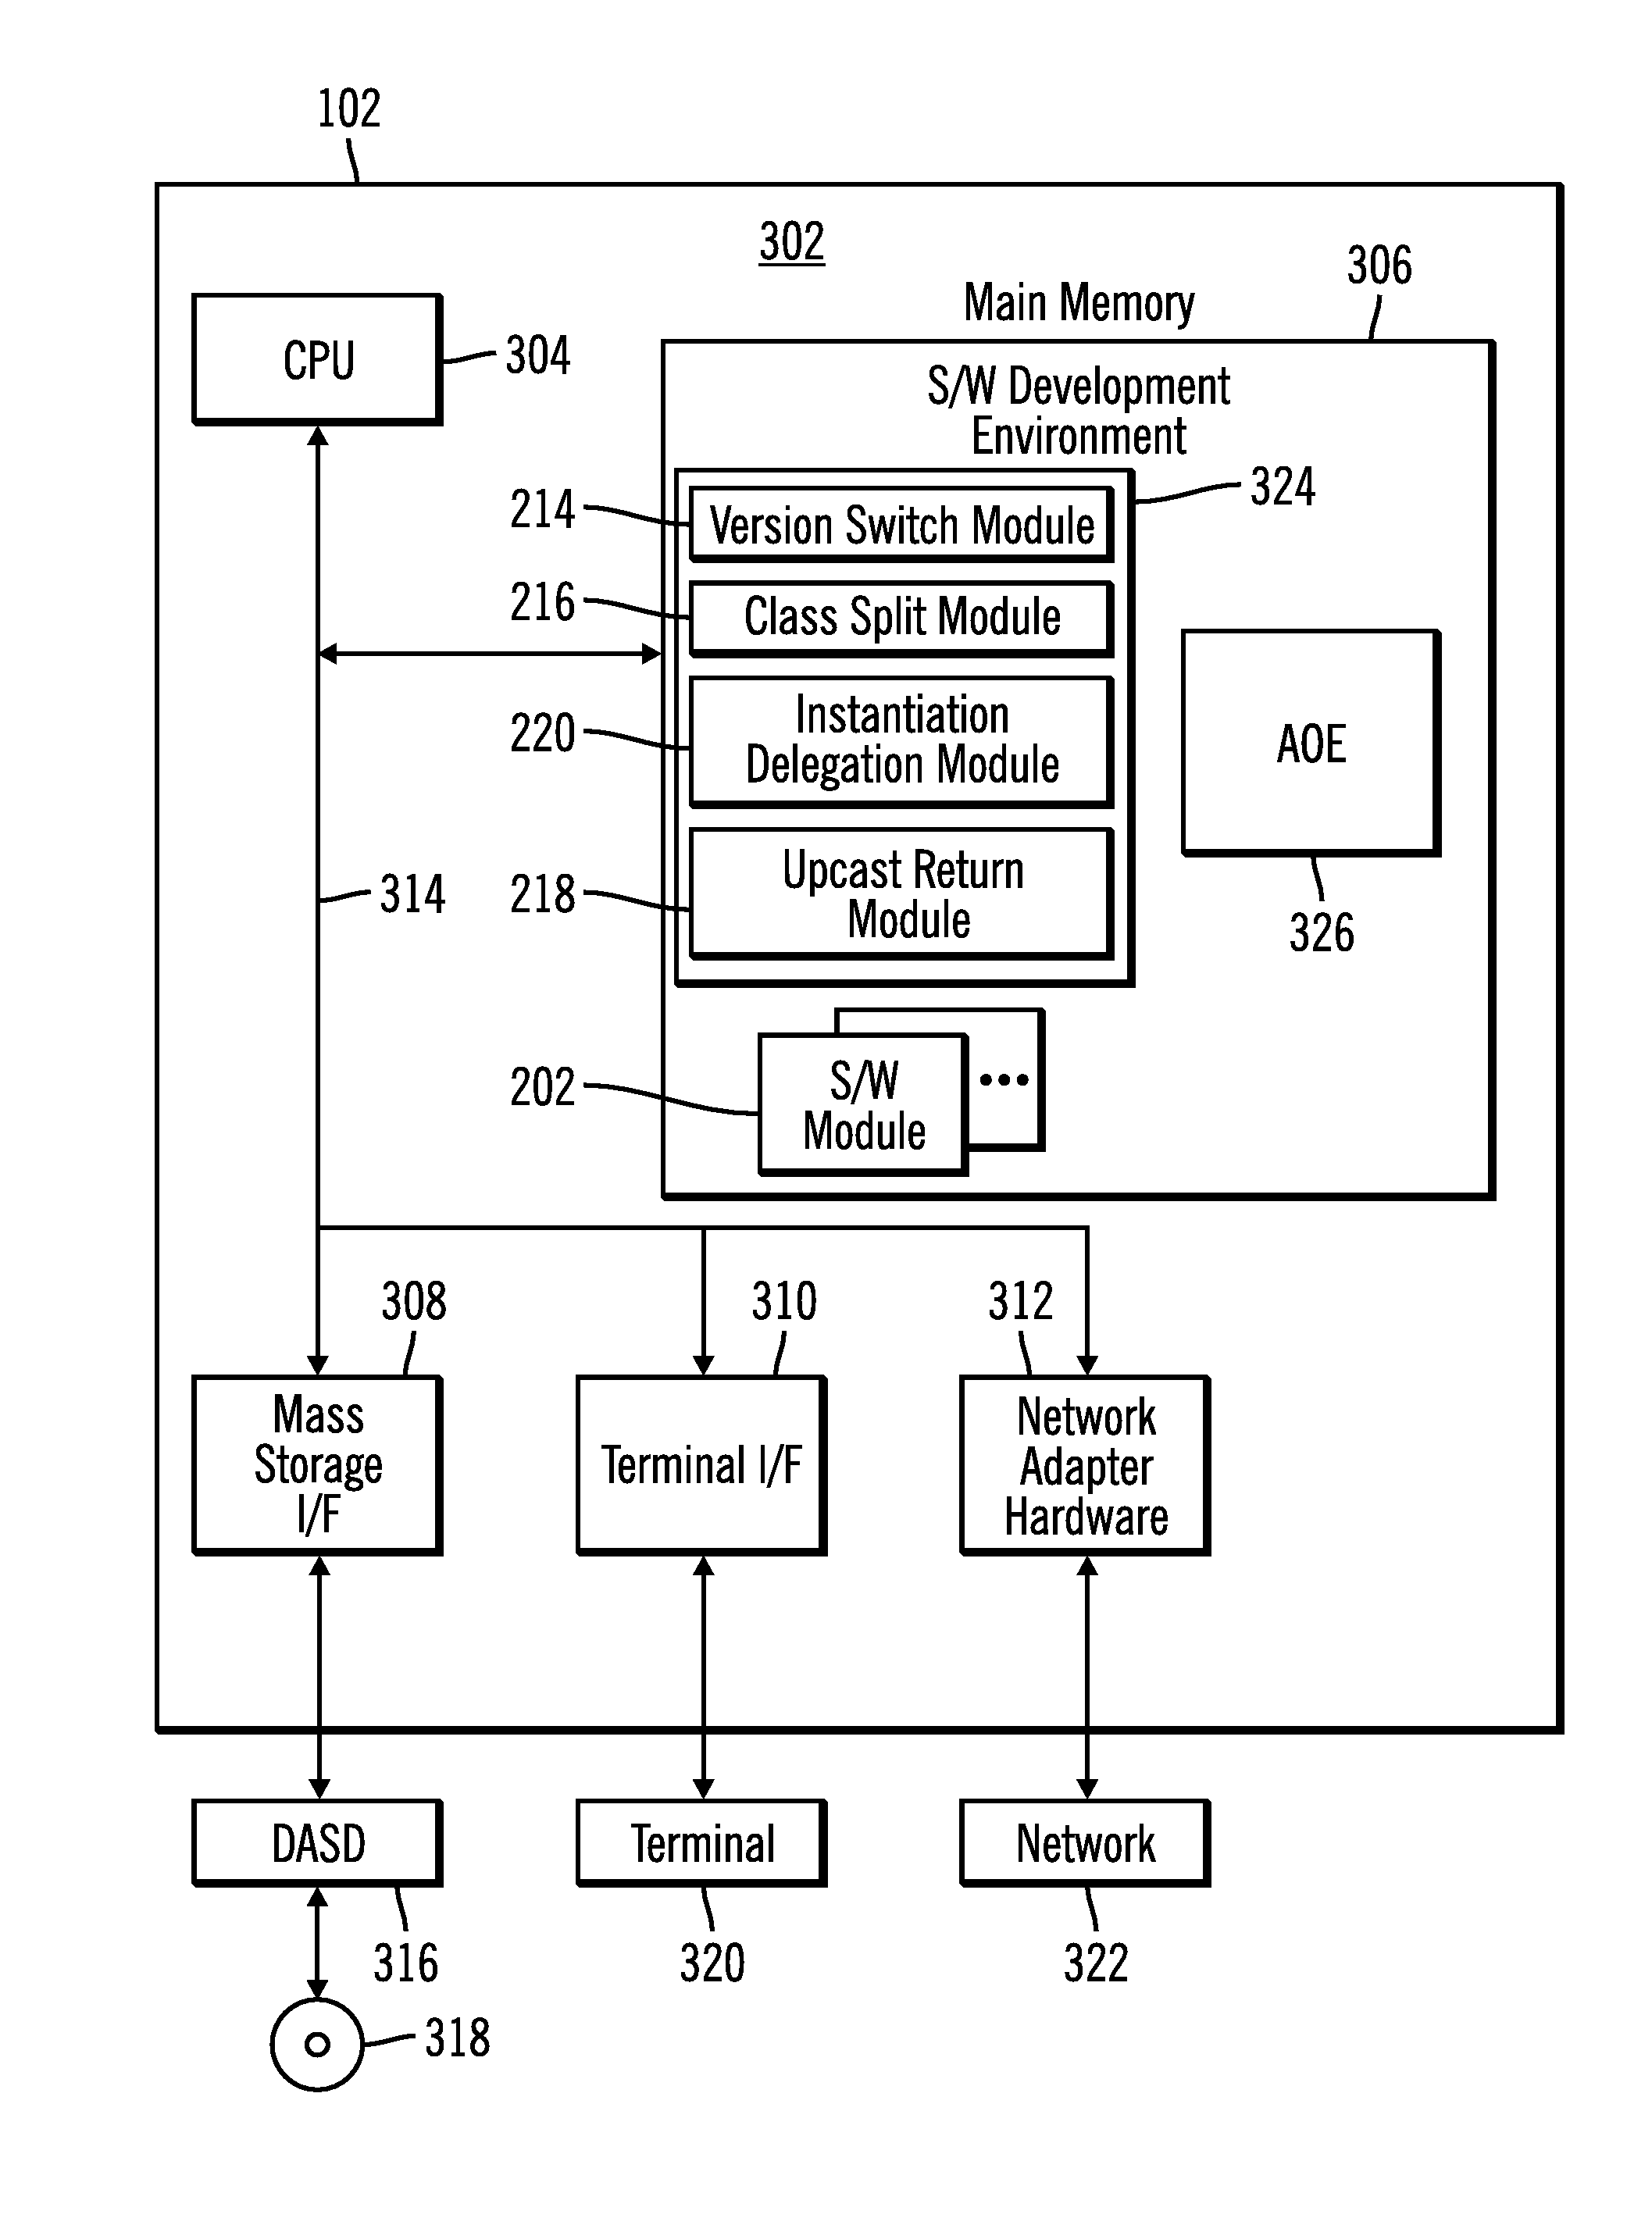 Single stream processing with multi-version support of application operating environments